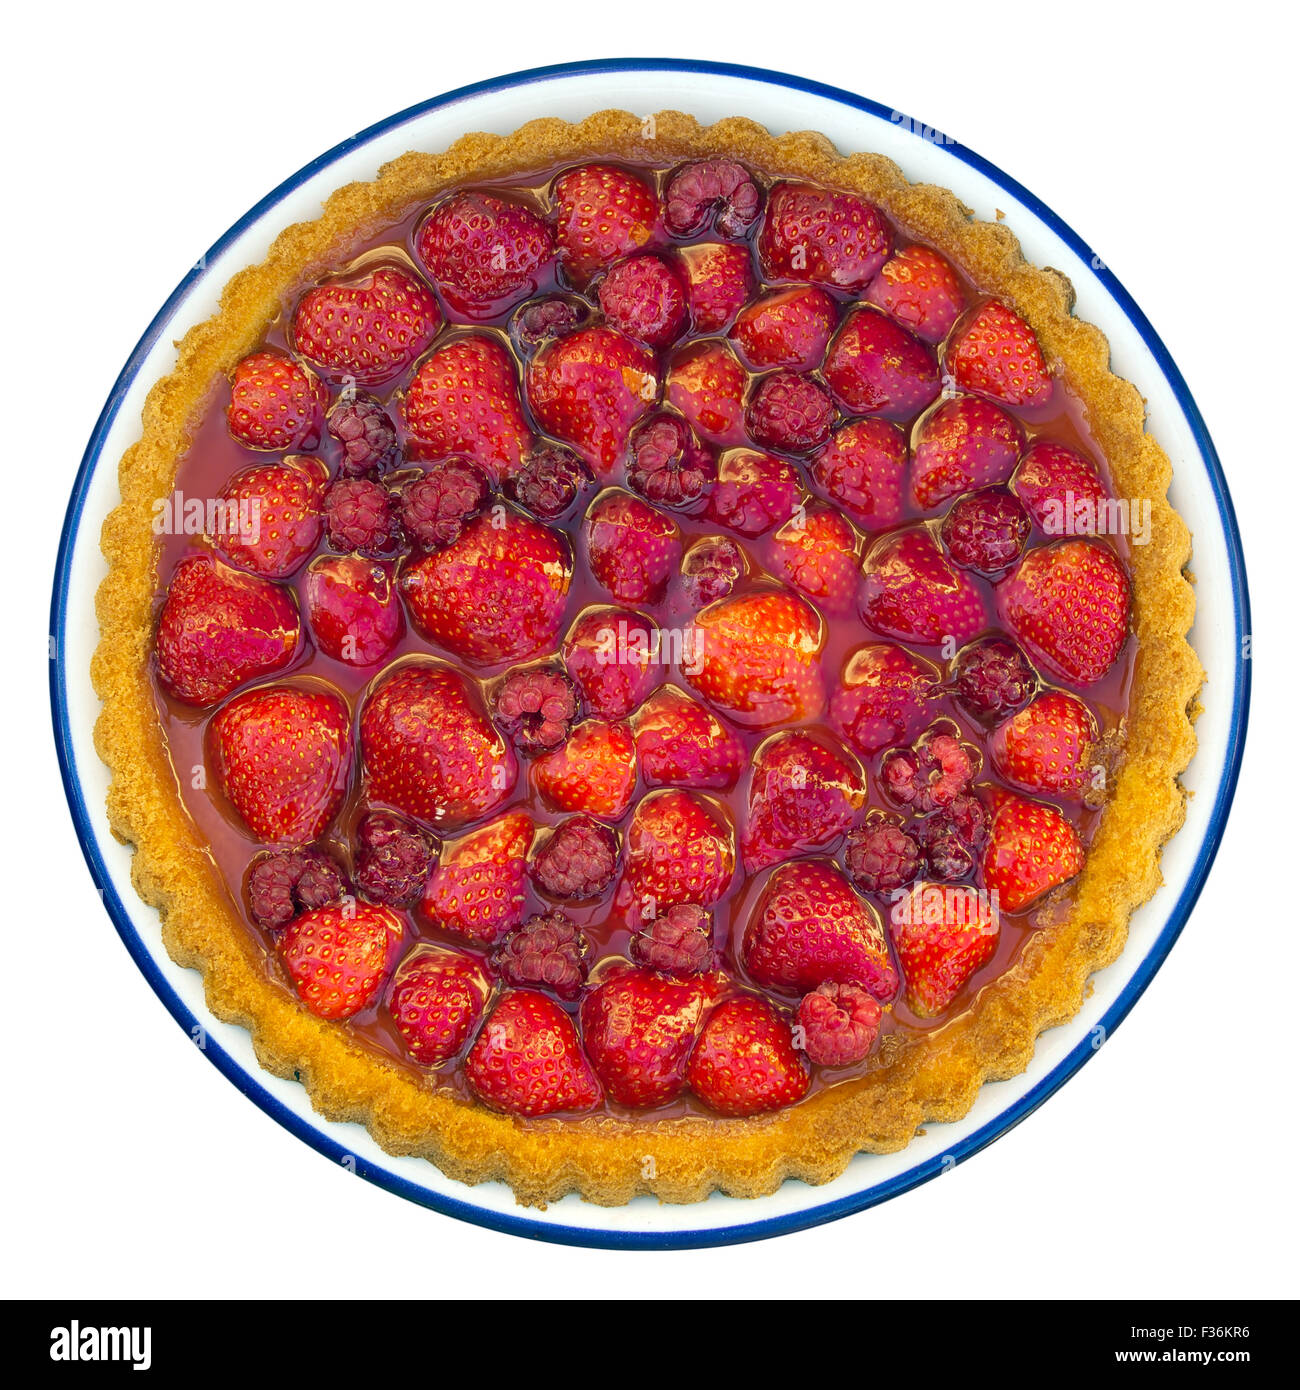 Traditional summer treat. Strawberry and raspberry flan, islated on white. Stock Photo